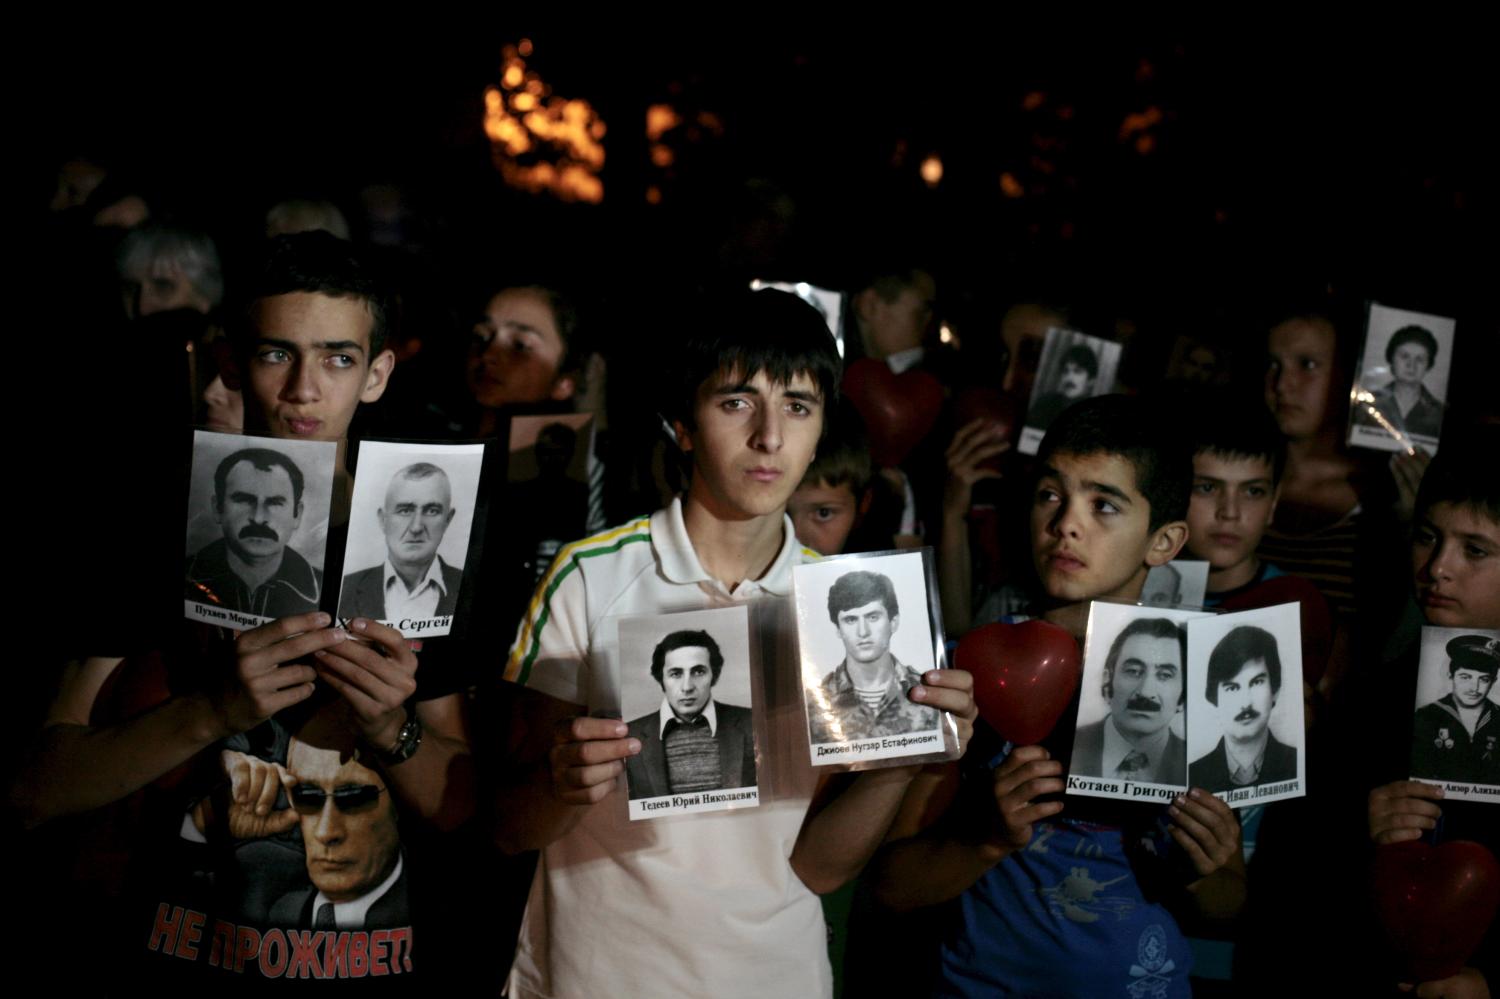 Participants hold portraits of people killed during Georgia's conflict with Russia over the breakaway region of South Ossetia in 2008, during a commemoration ceremony in Tskhinvali, Georgia, August 7, 2015. Picture taken August 7, 2015.  REUTERS/Kazbek Basayev